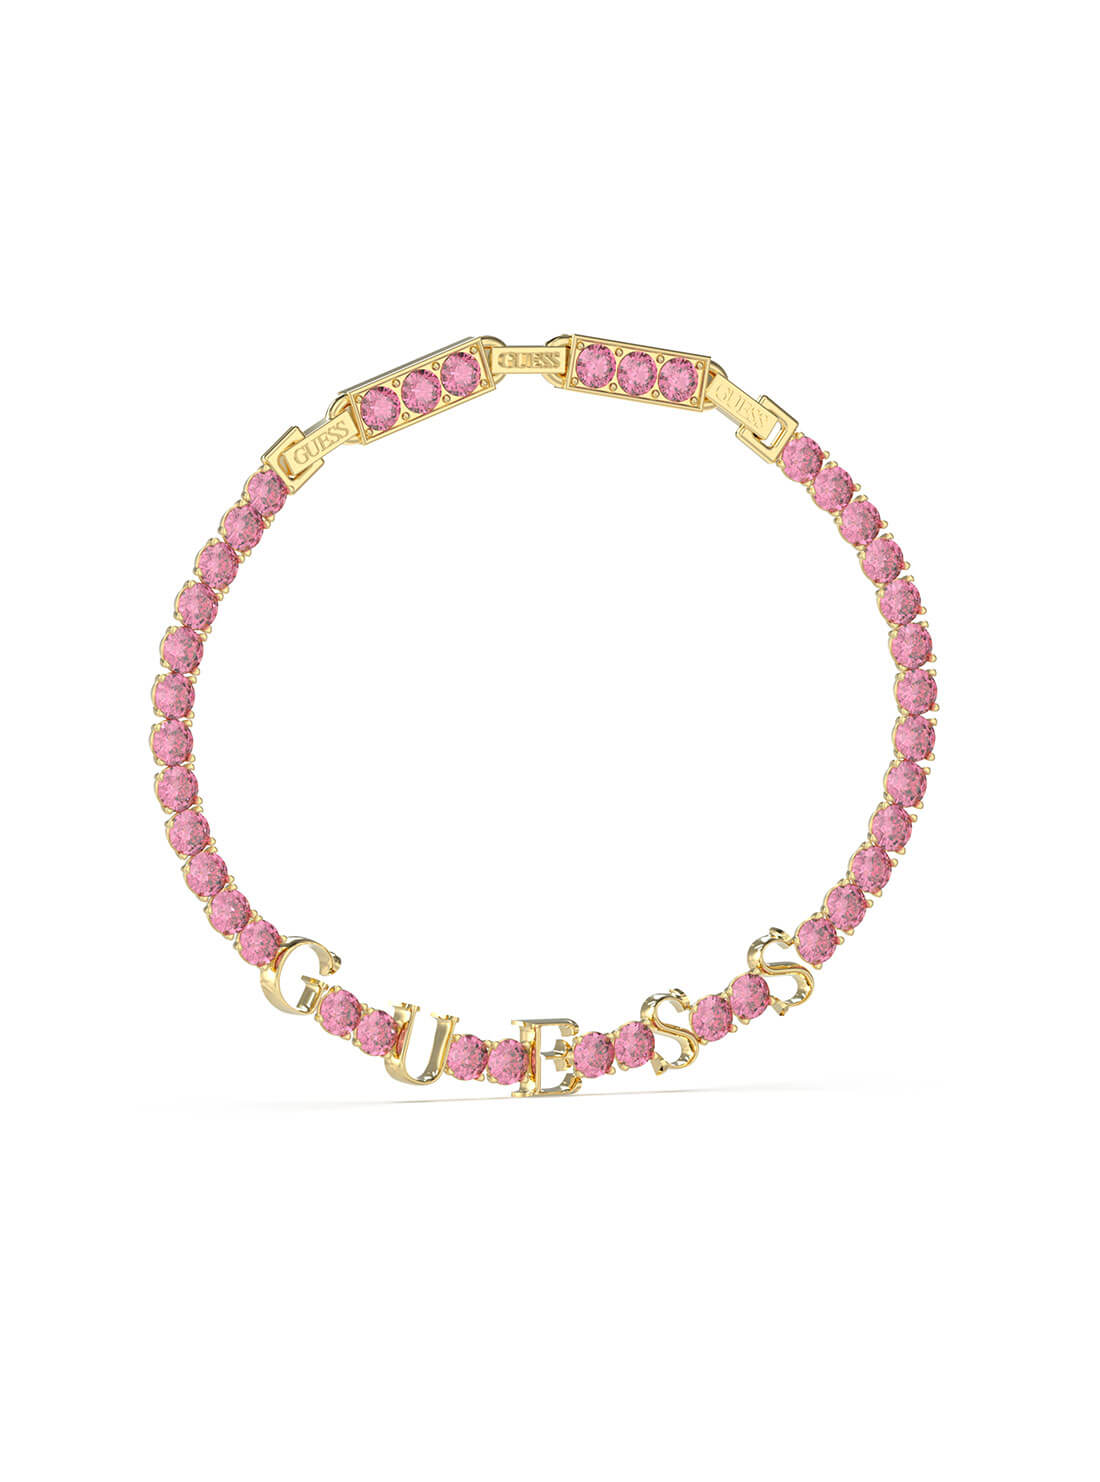 Gold Arm Party Pink Crystal Tennis Bracelet | GUESS Women's Jewellery | front view